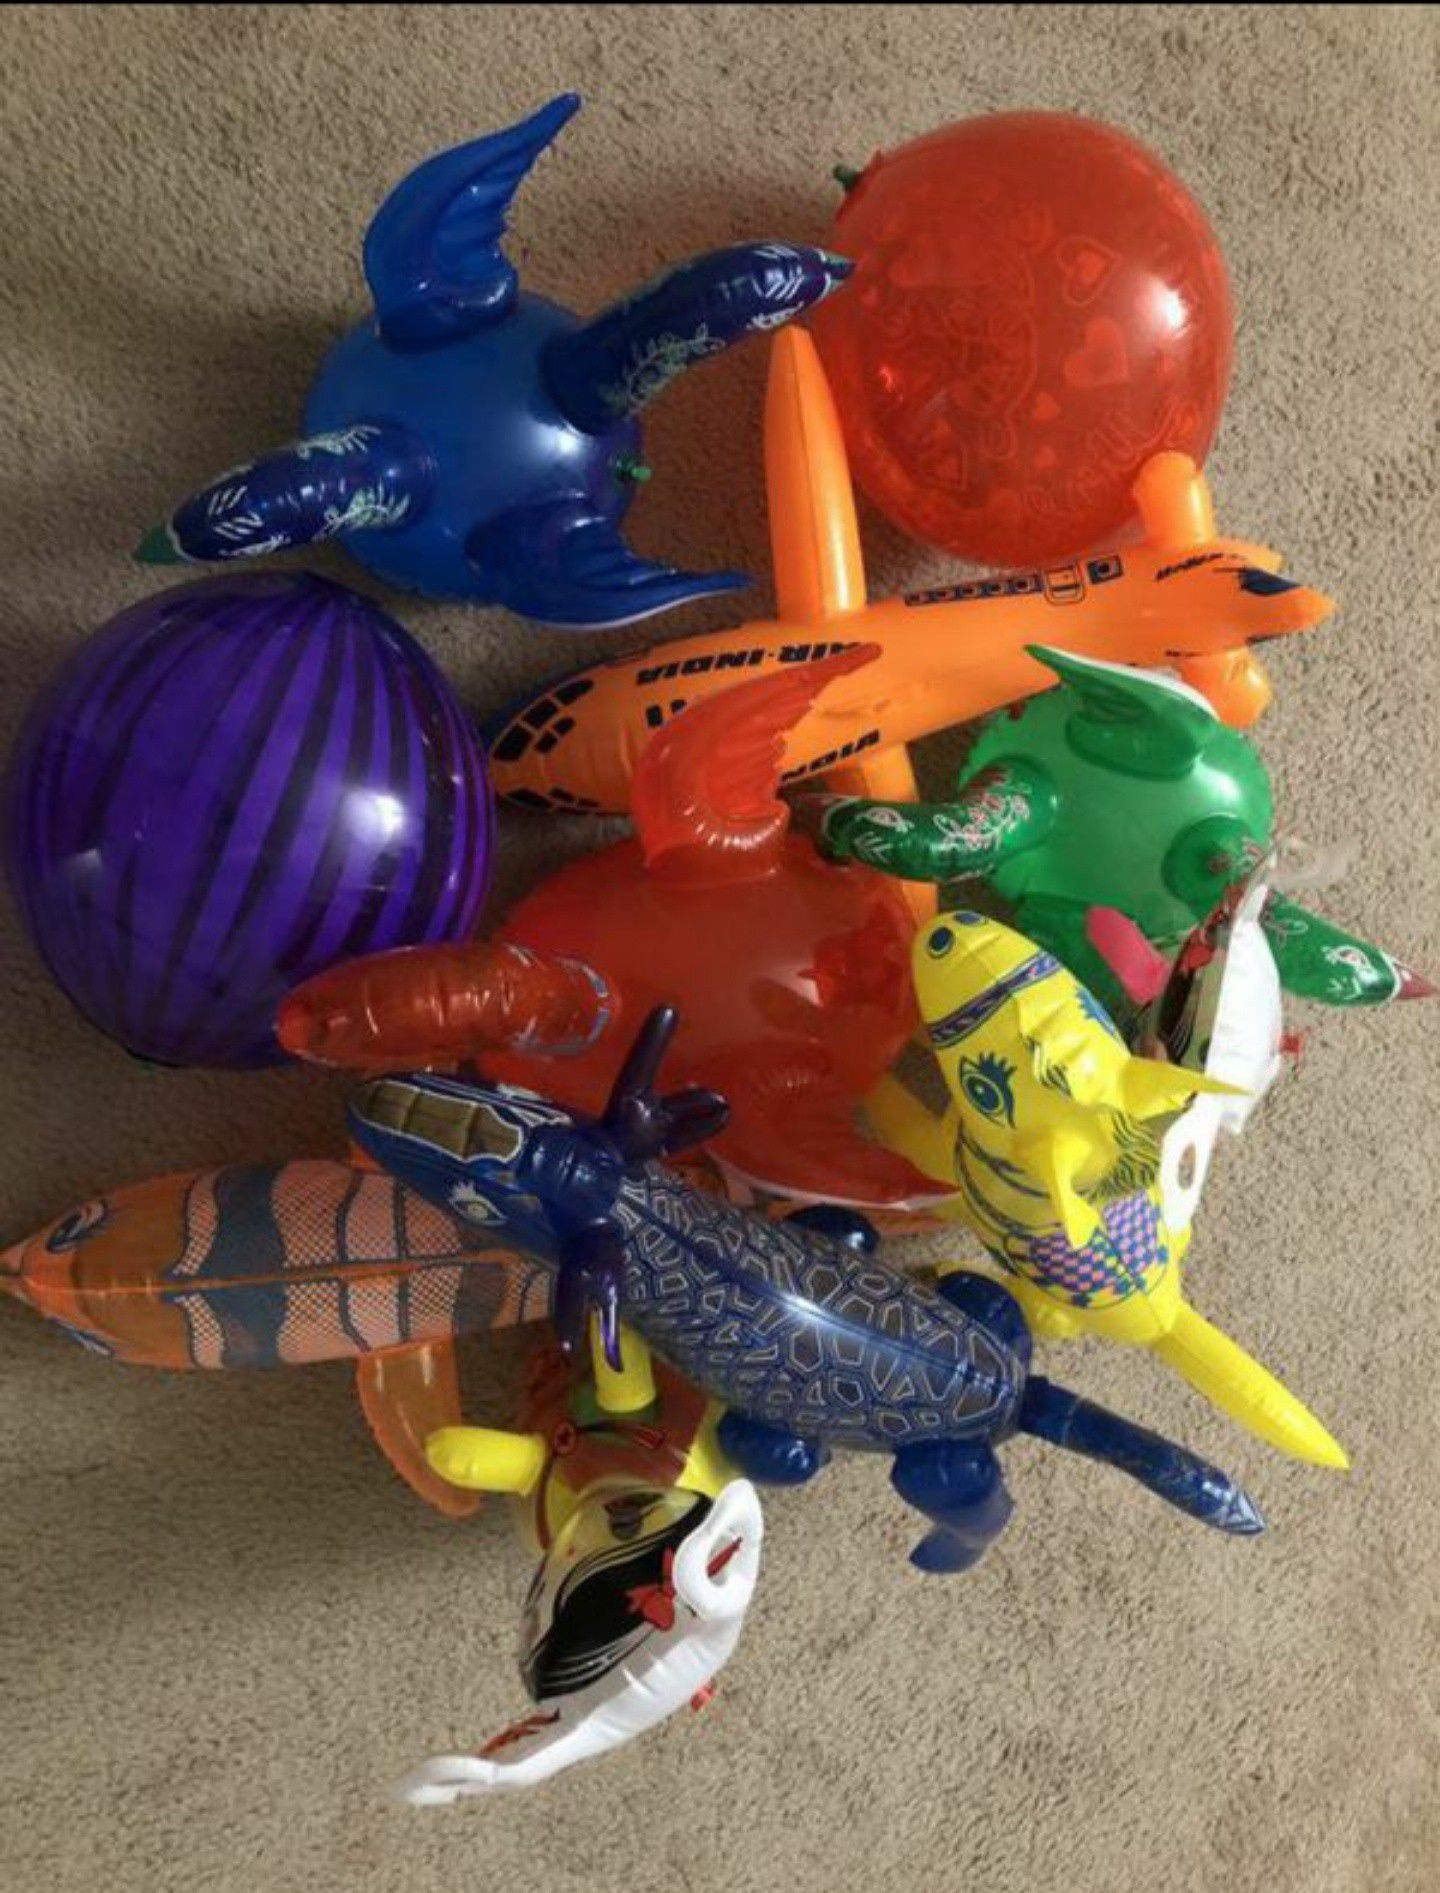 Duck ,whale, jiraffe,horse,plane queen,ball (inflatable toys)... inflatable kids toys...all are included